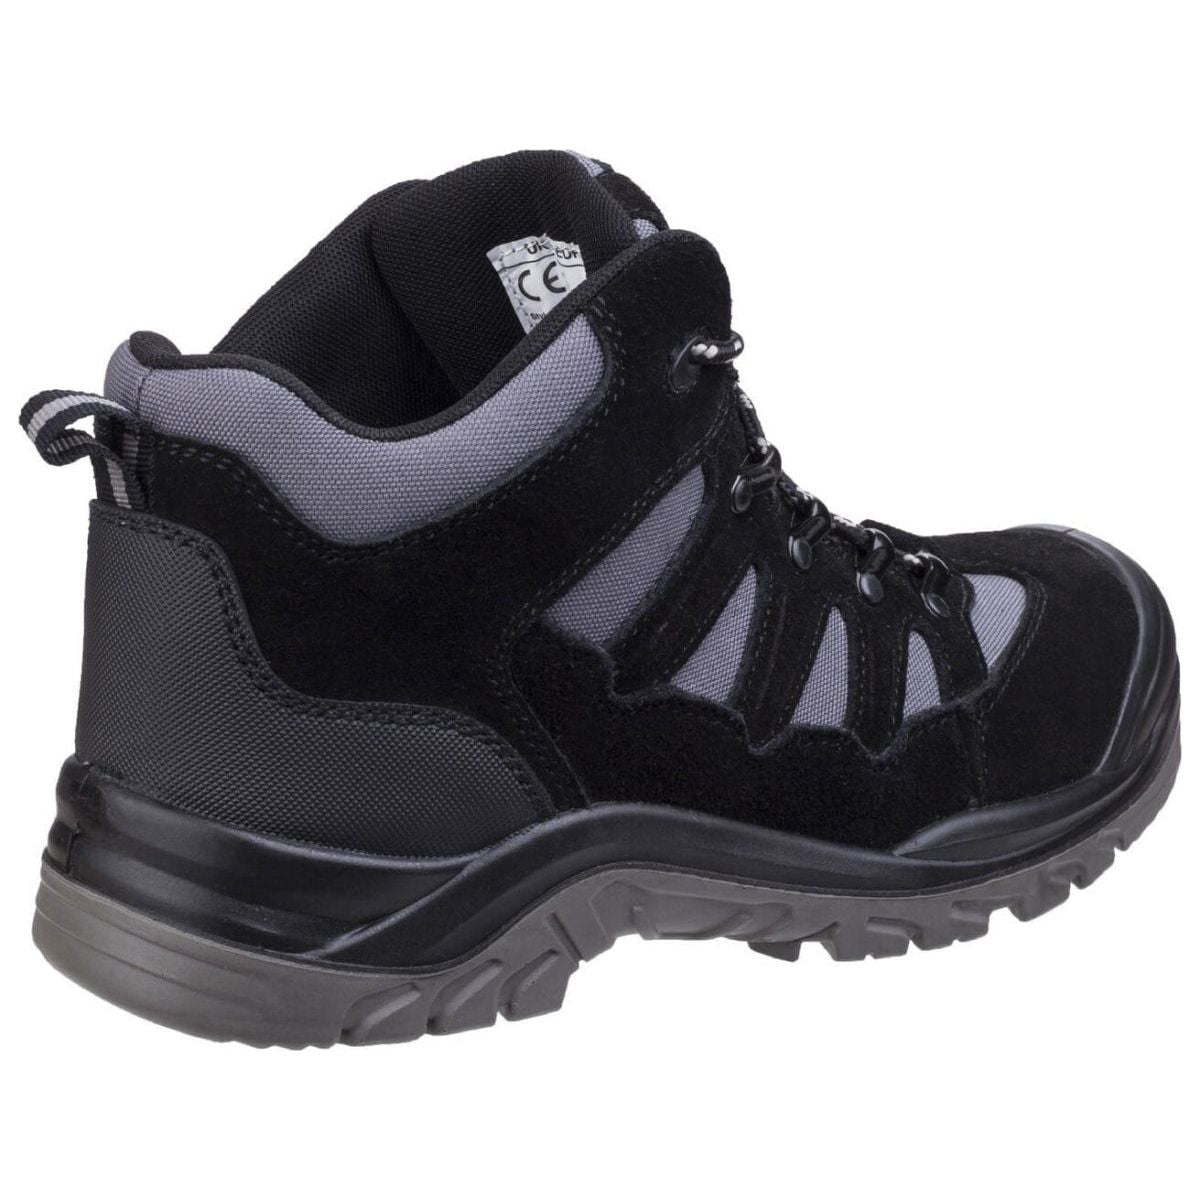 Amblers As251 Safety Hiking Boots Mens - workweargurus.com